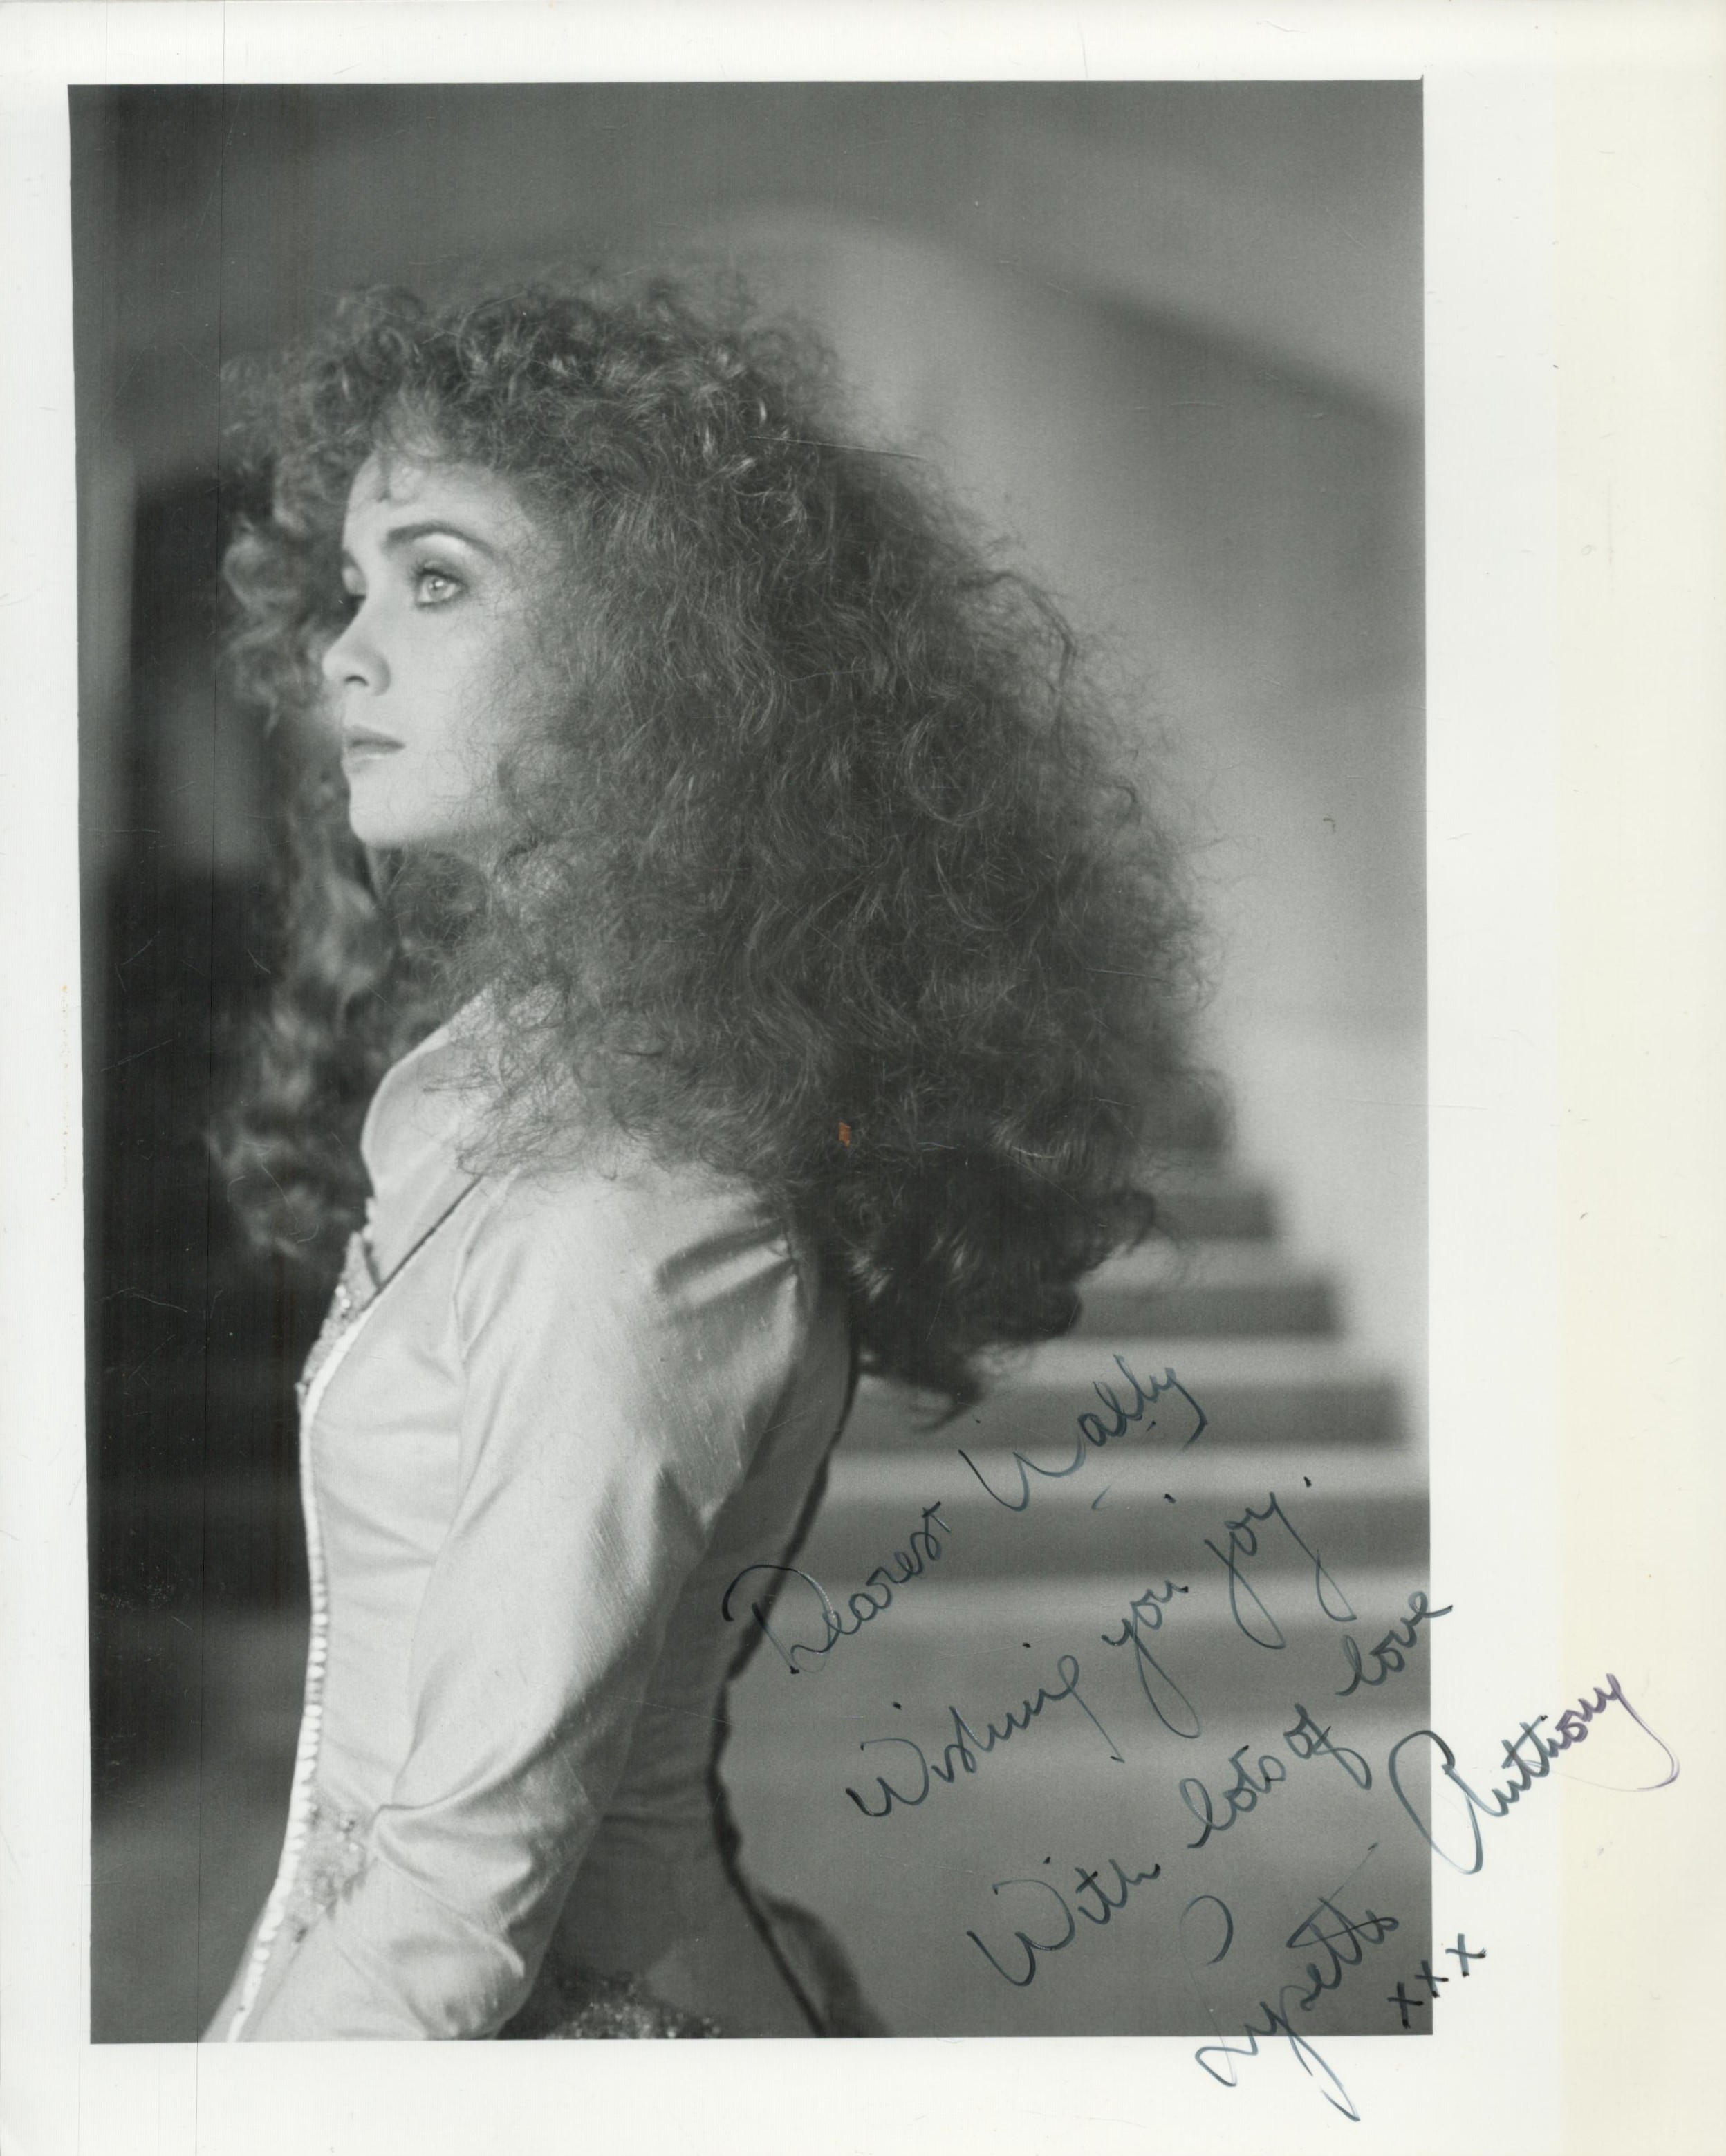 Lysette Anthony, actress and model. A signed and dedicated 10x8 photo. She is known for her many